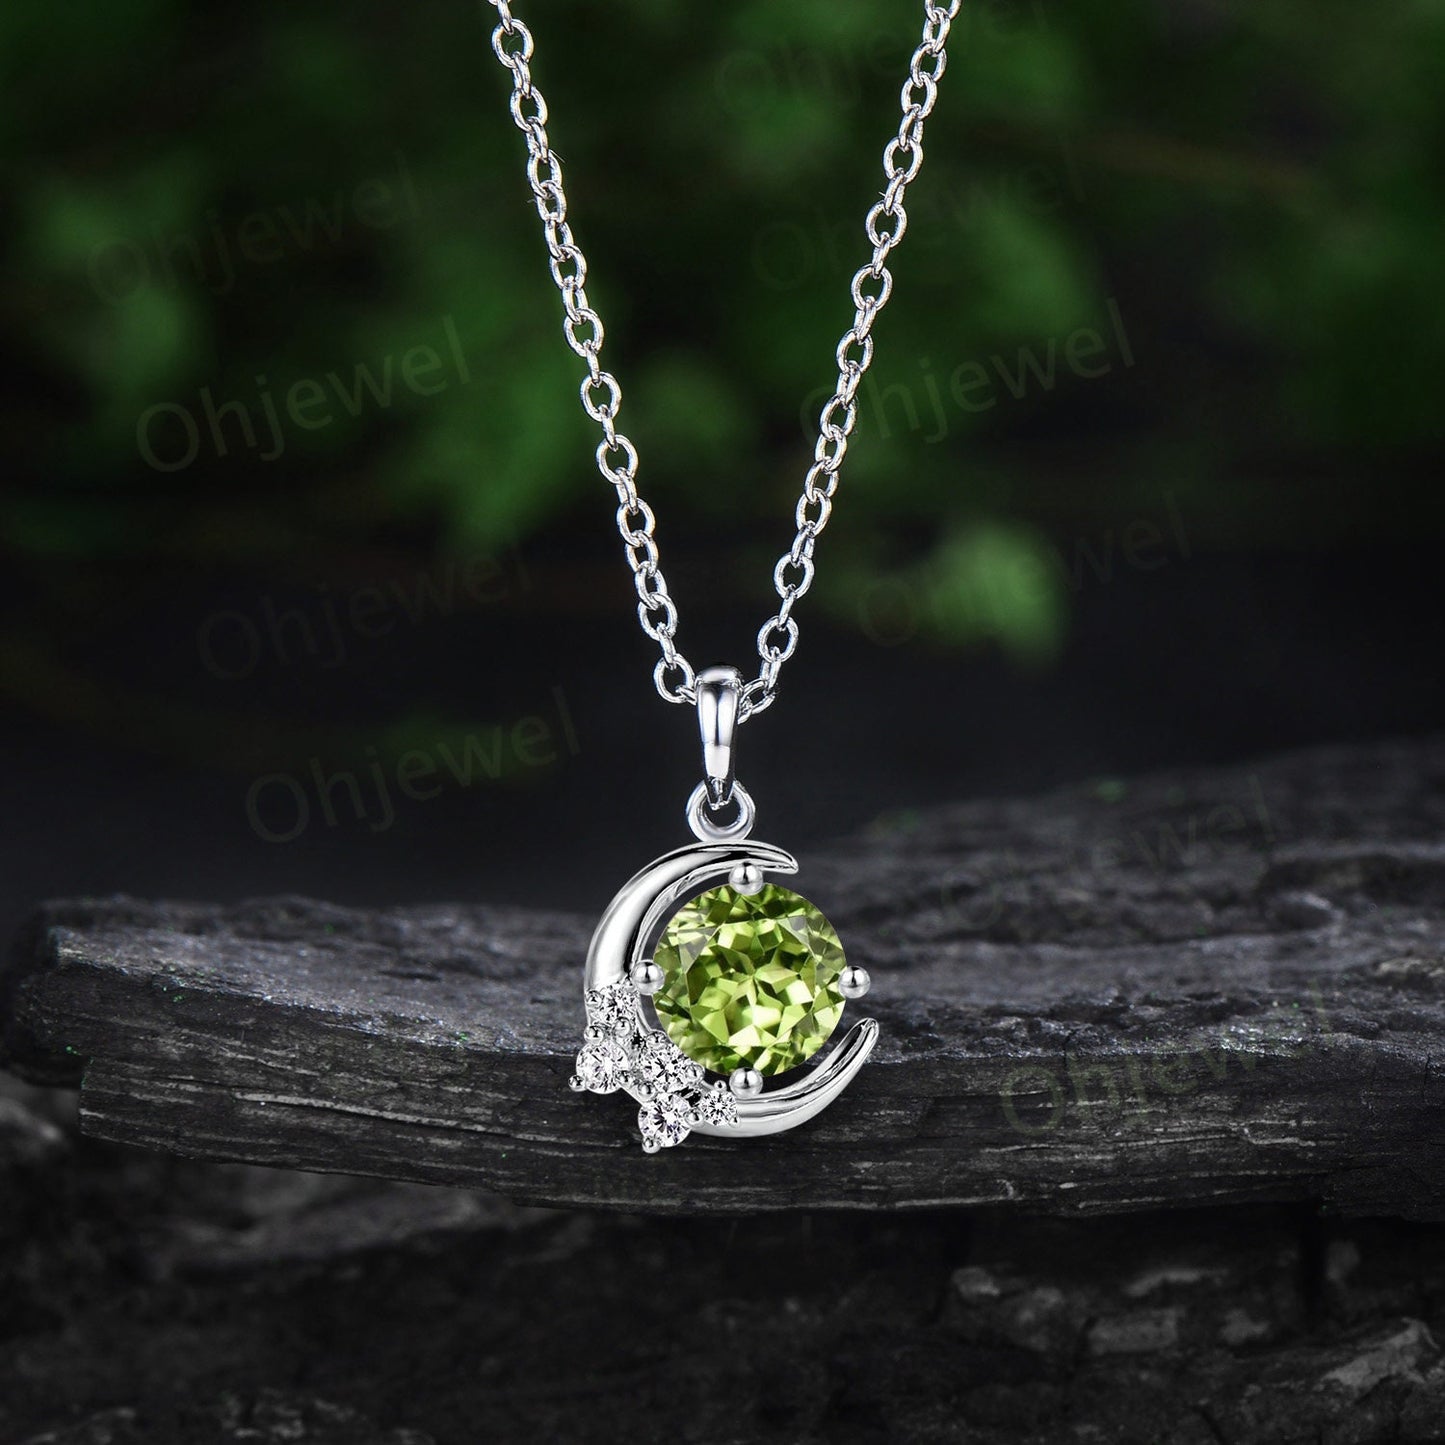 1ct Round peridot necklace solid 14k rose gold unique moon necklace cluster moissanite Pendant women anniversary gift August birthstone